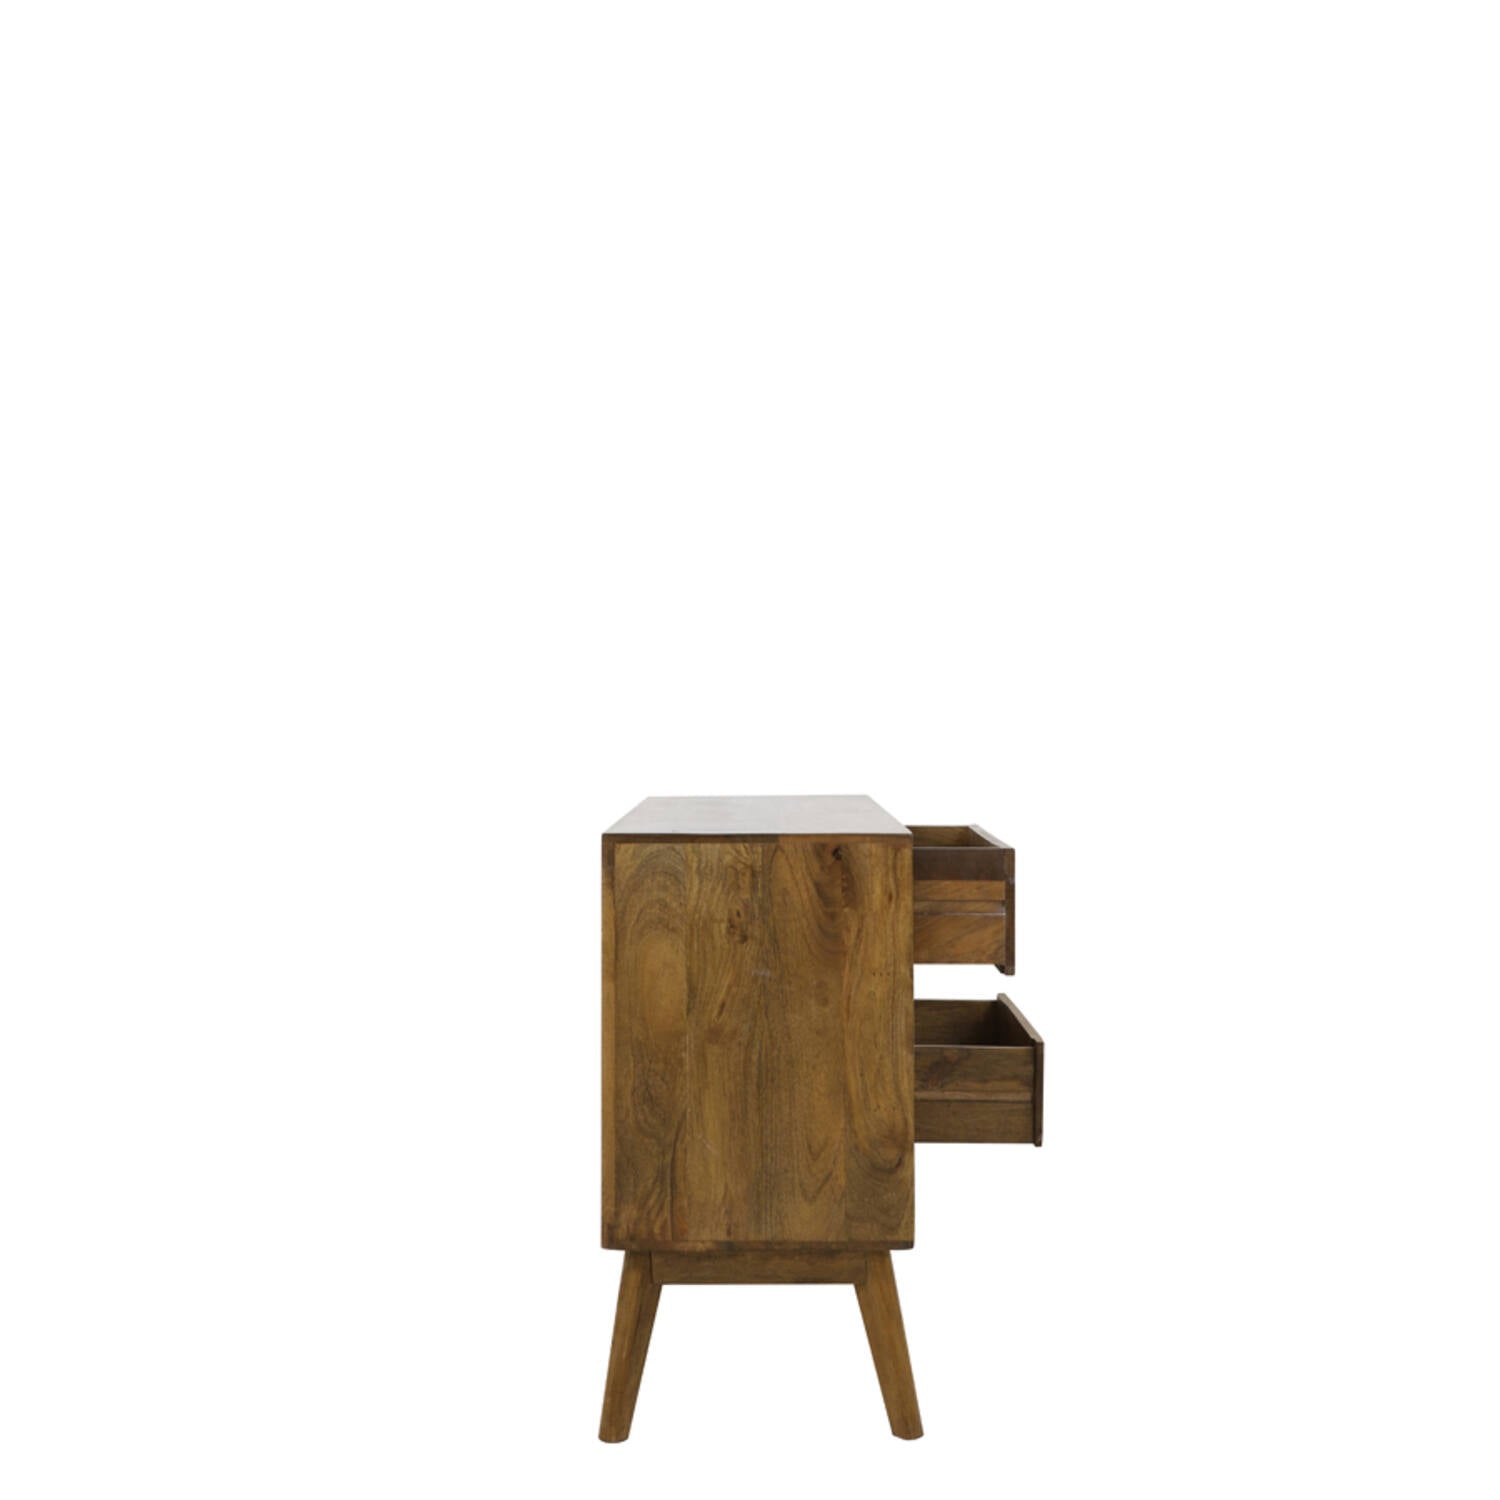 Cabinet with 6 drawers 114x40x80 cm ESPITA wood oil brown